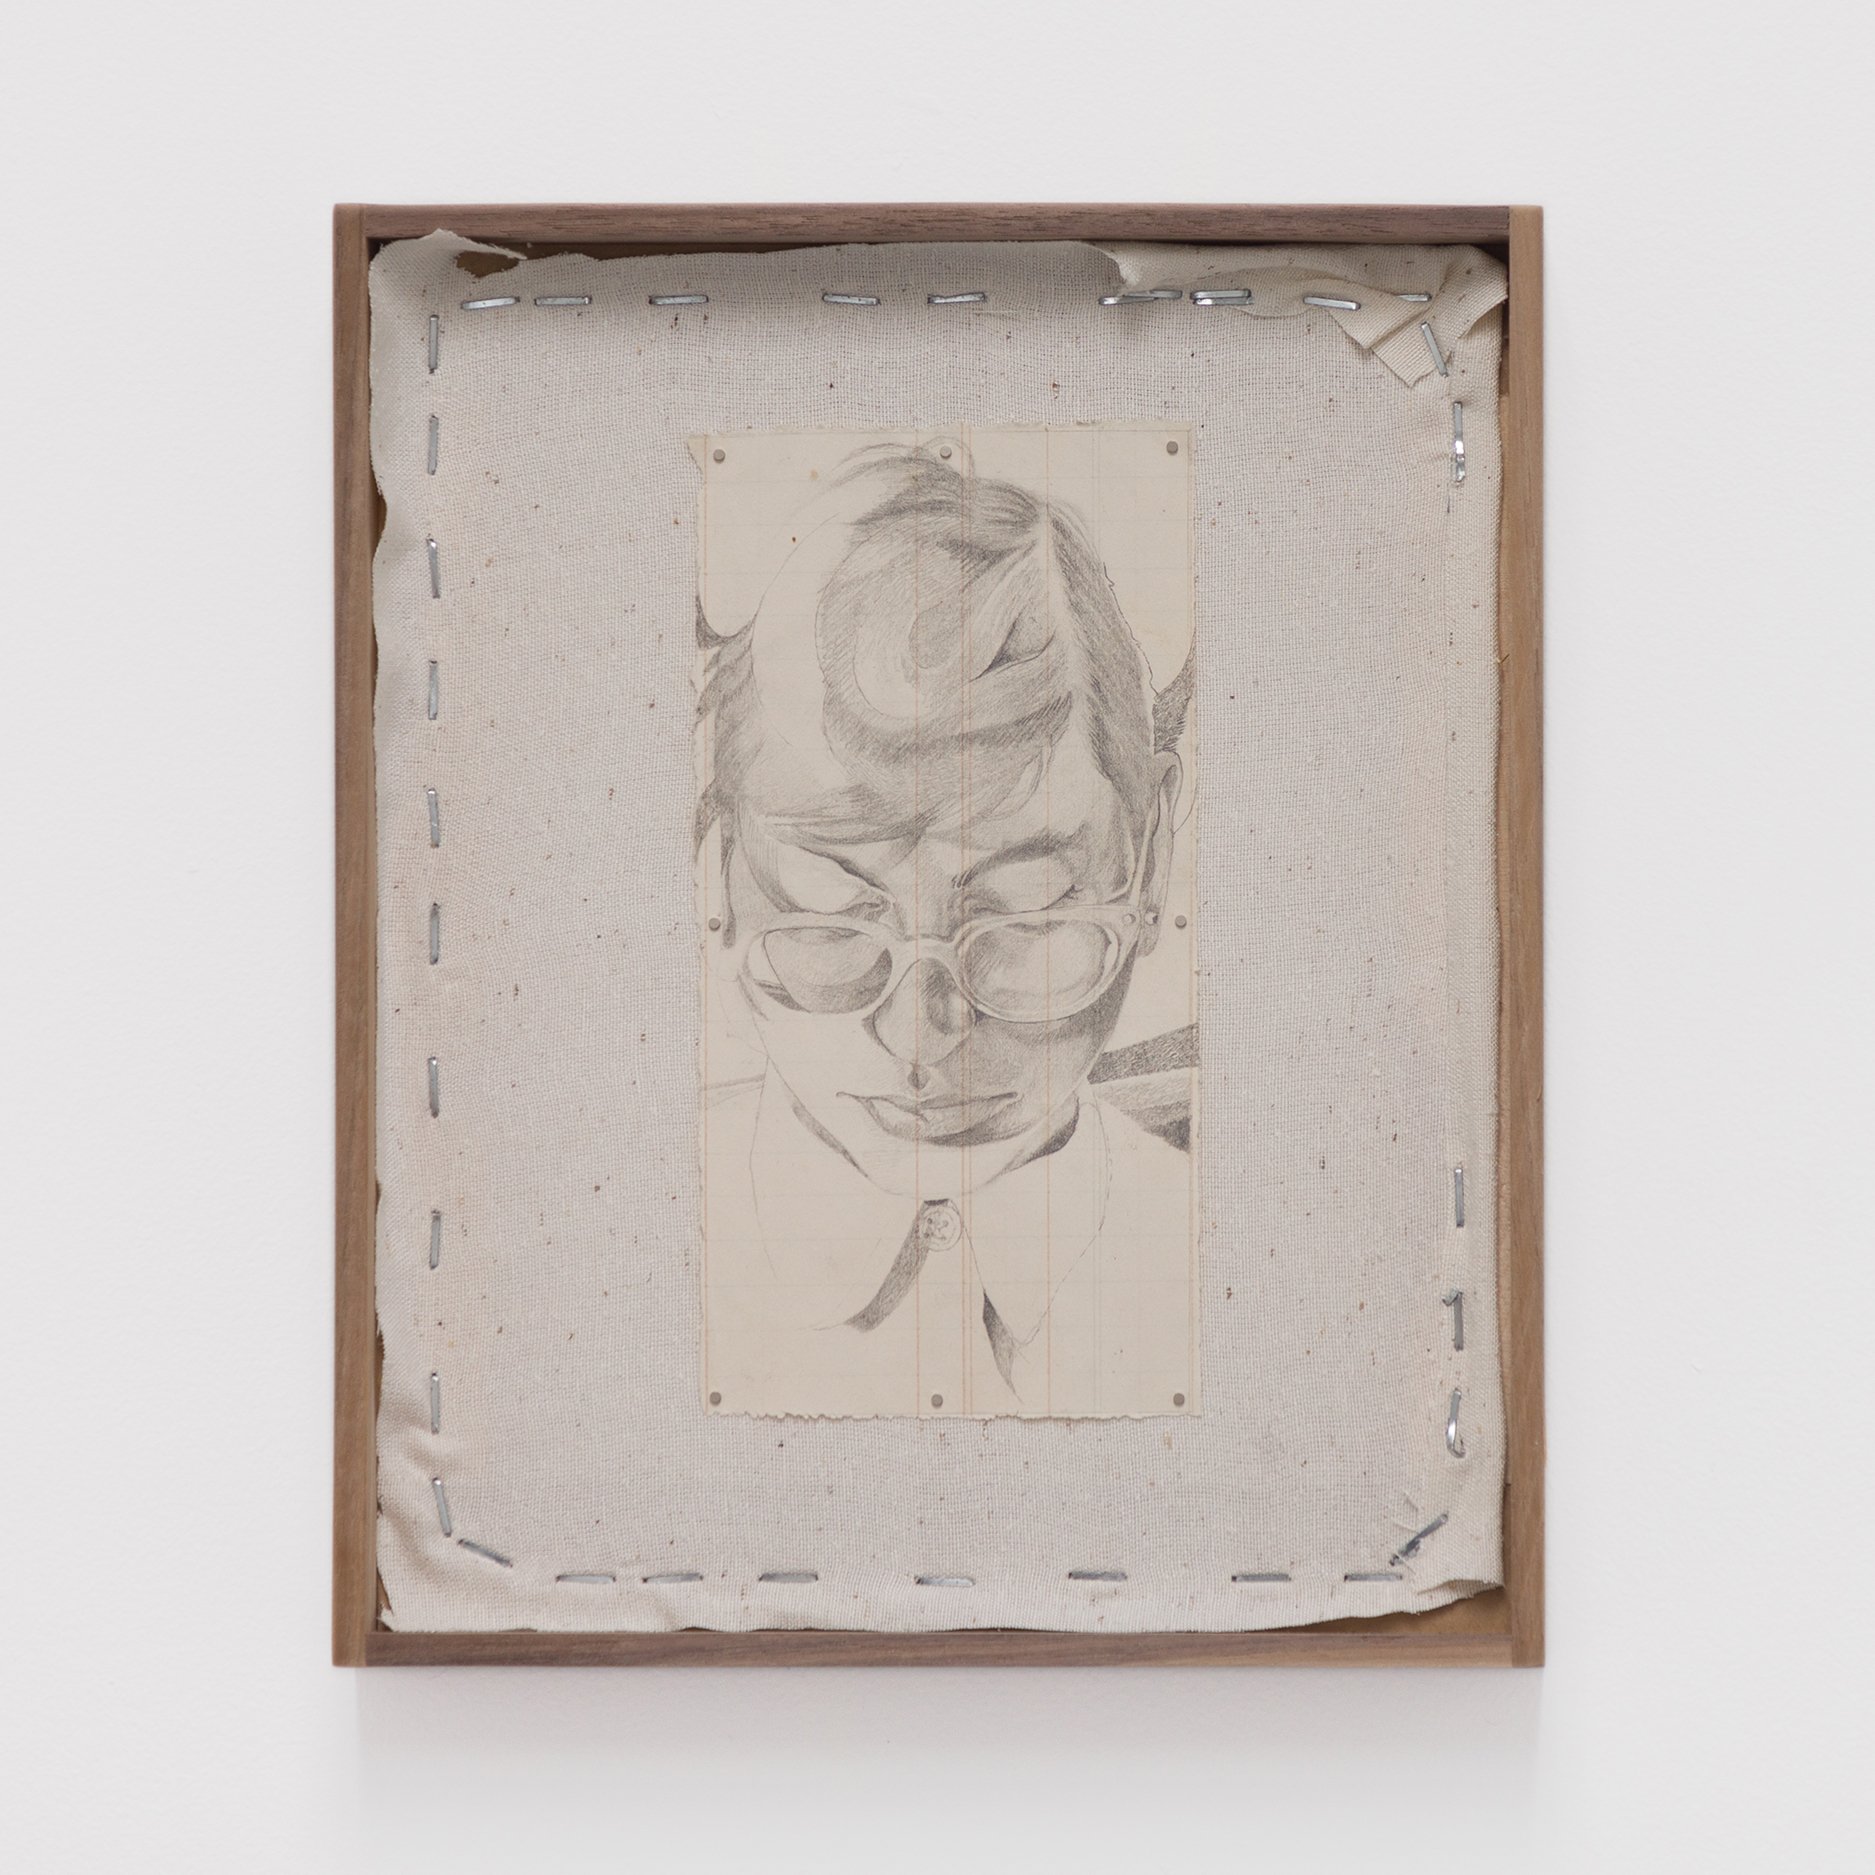   Portrait,  2021. Pencil on found antique paper in artist frame. 10 x 8.5 inches. 